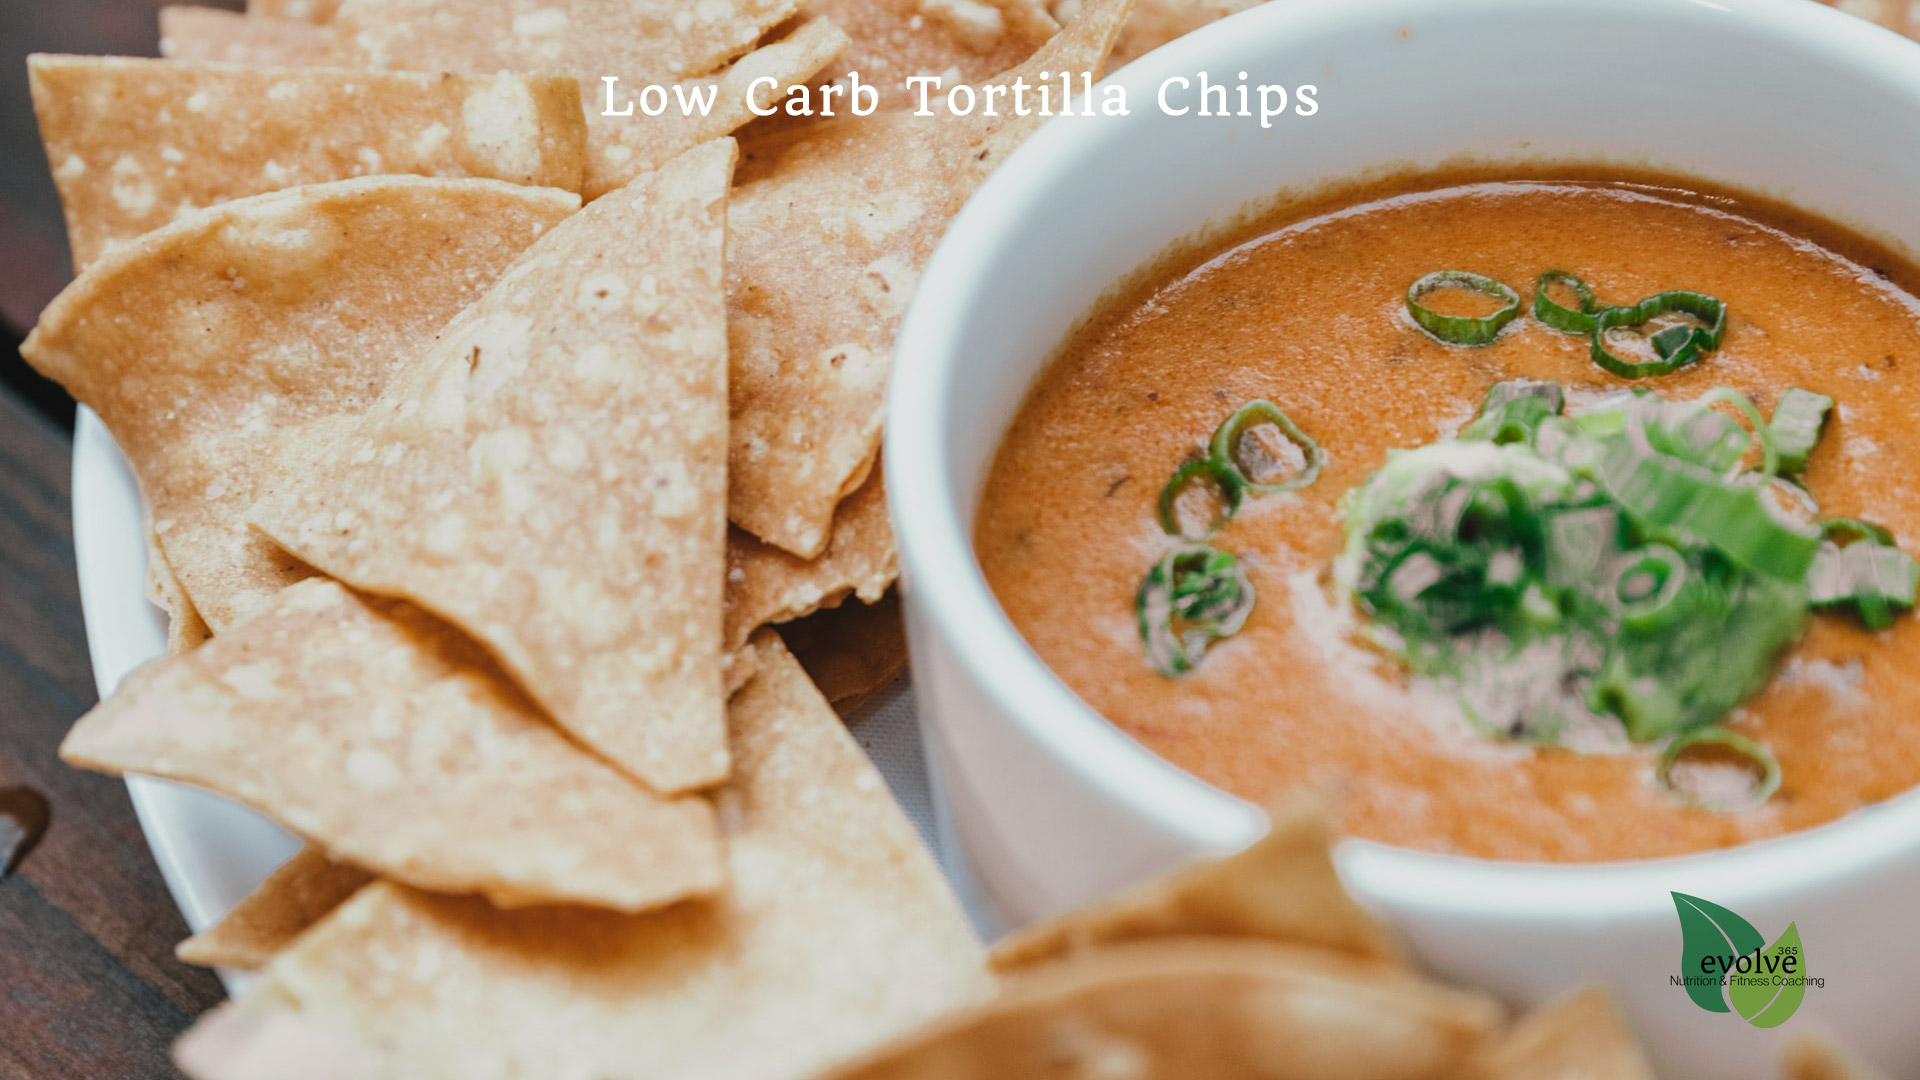 Low Carb Tortilla Chips Featured